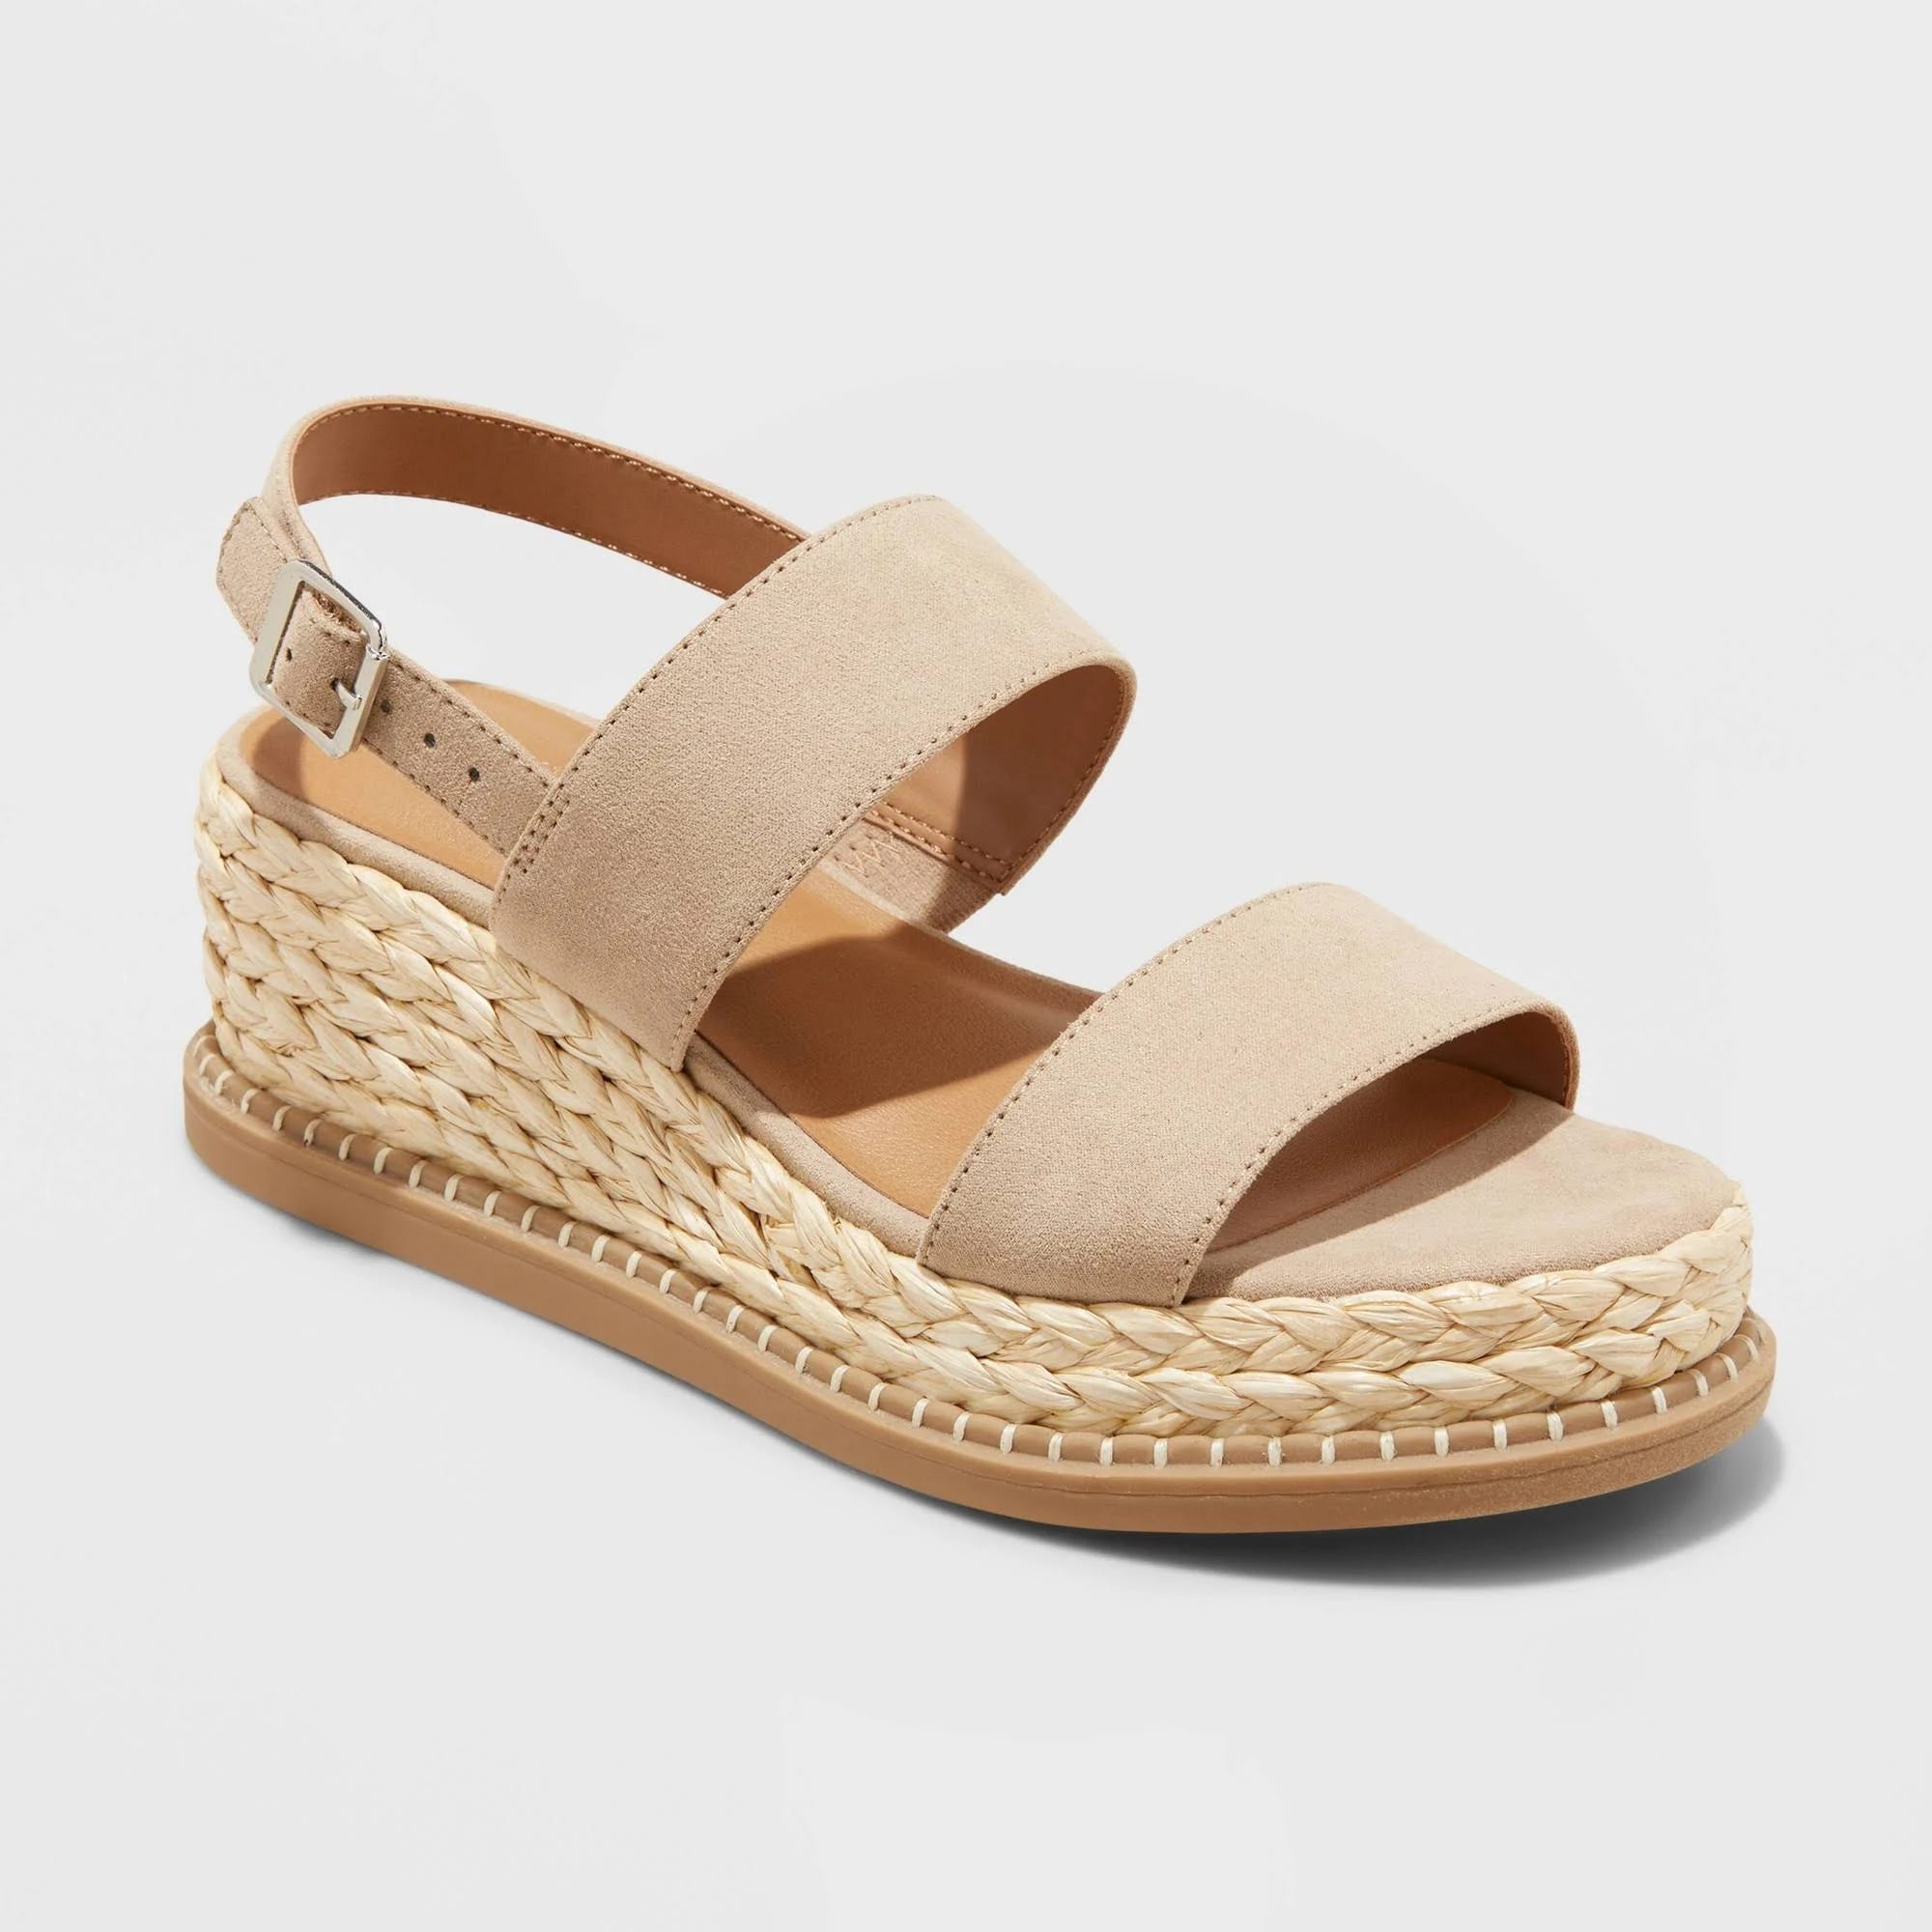 Woven Wedge Heels: Elevated Style and Versatility | Image